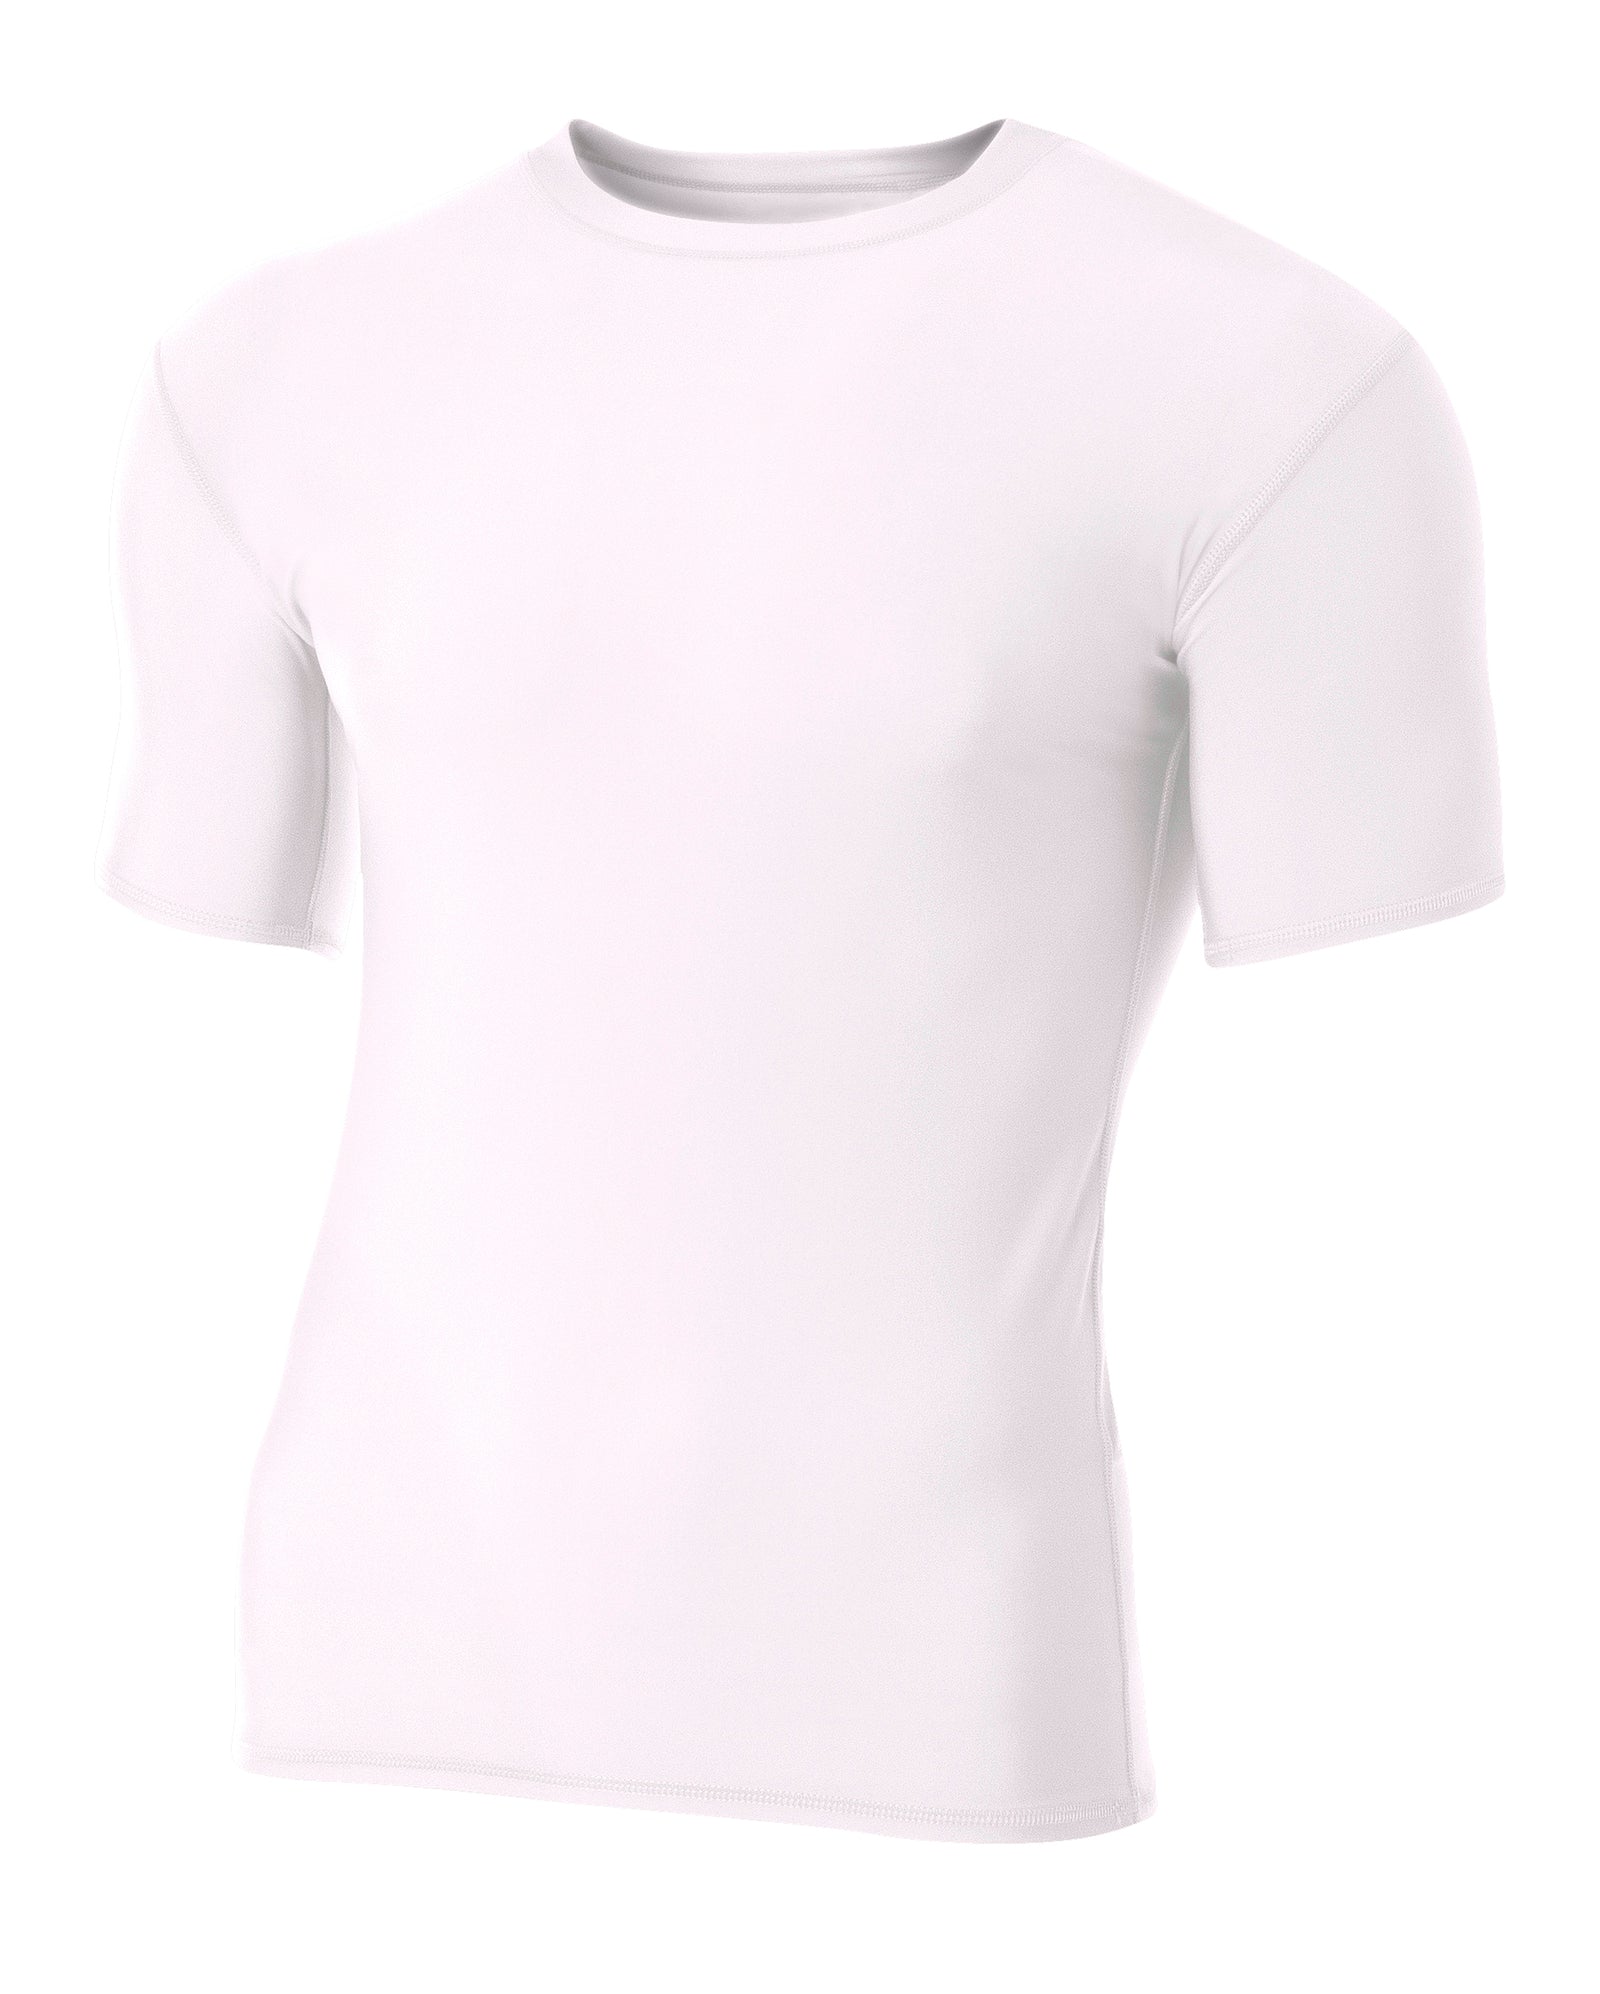 White A4 A4 Youth Short Sleeve Compression Crew